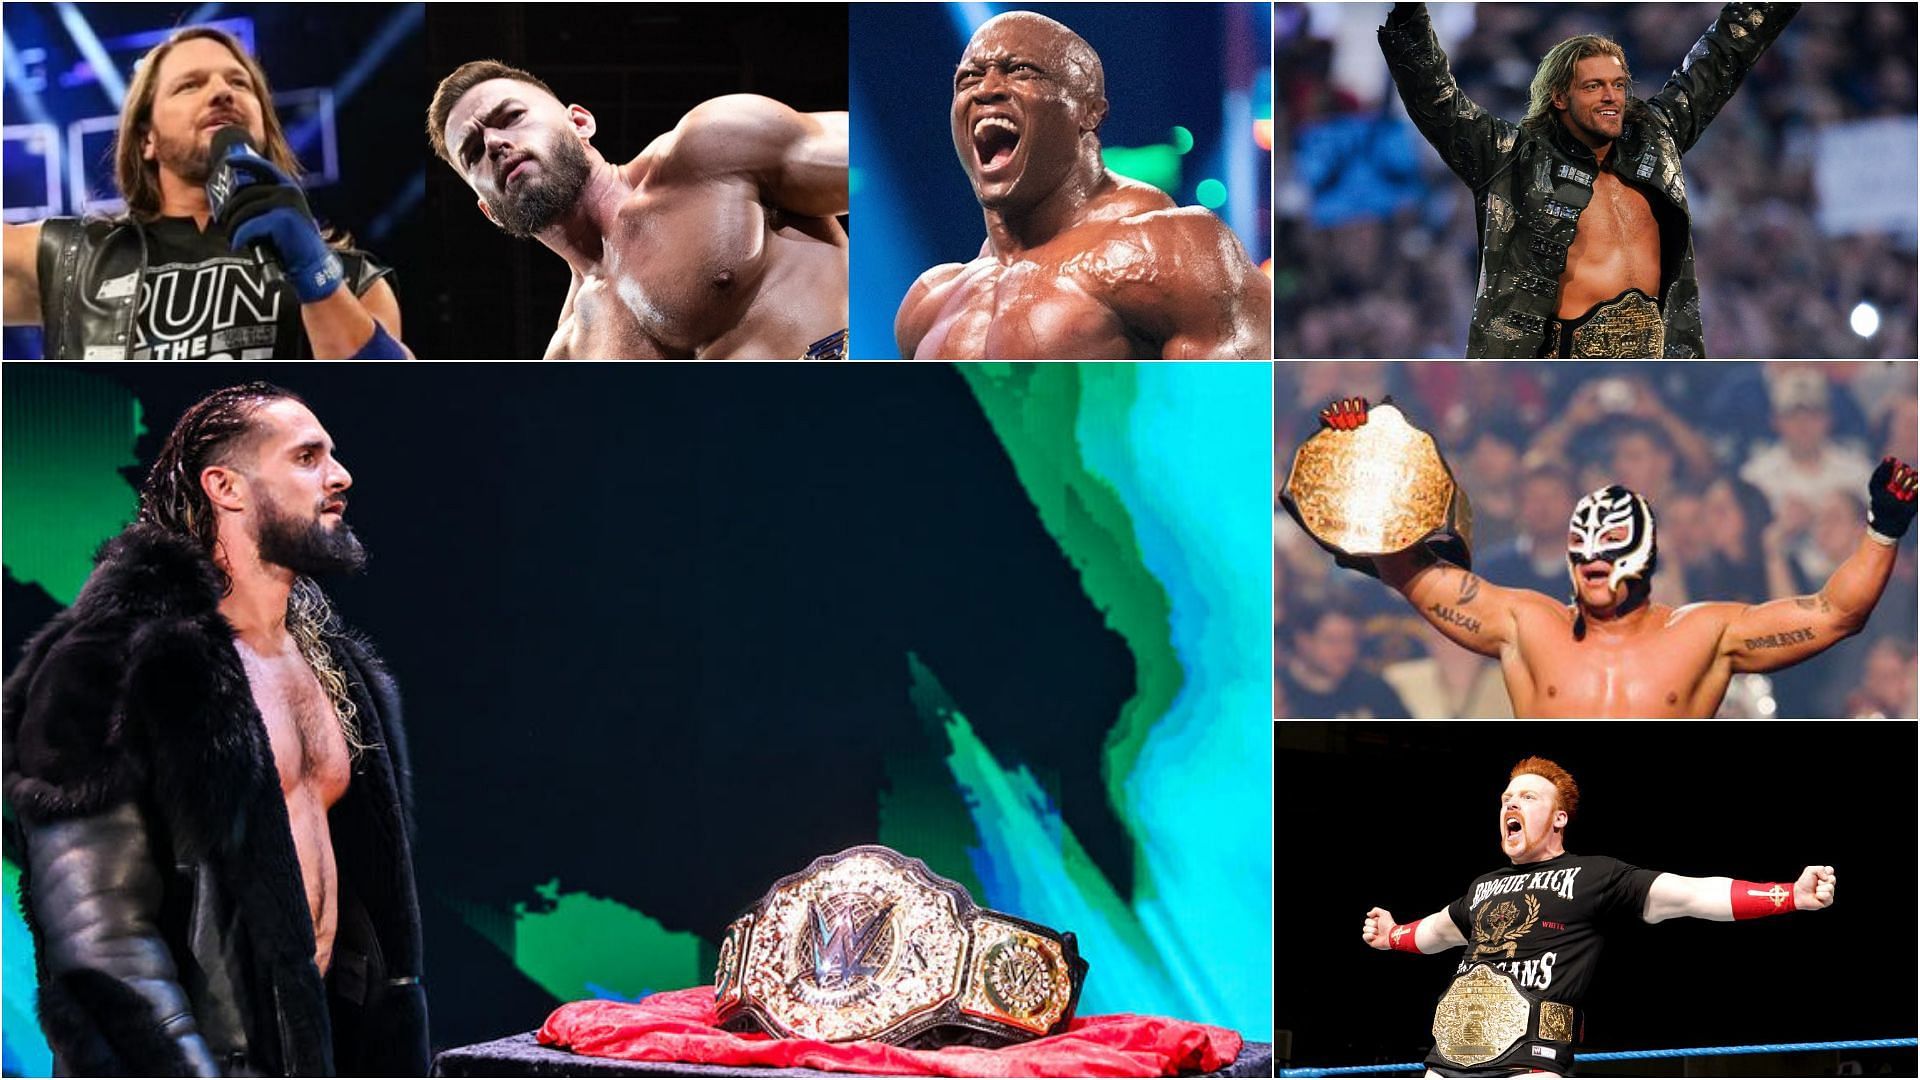 Who will vie with The Visionary in Saudi Arabia to become the inaugural World Heavyweight Champion?